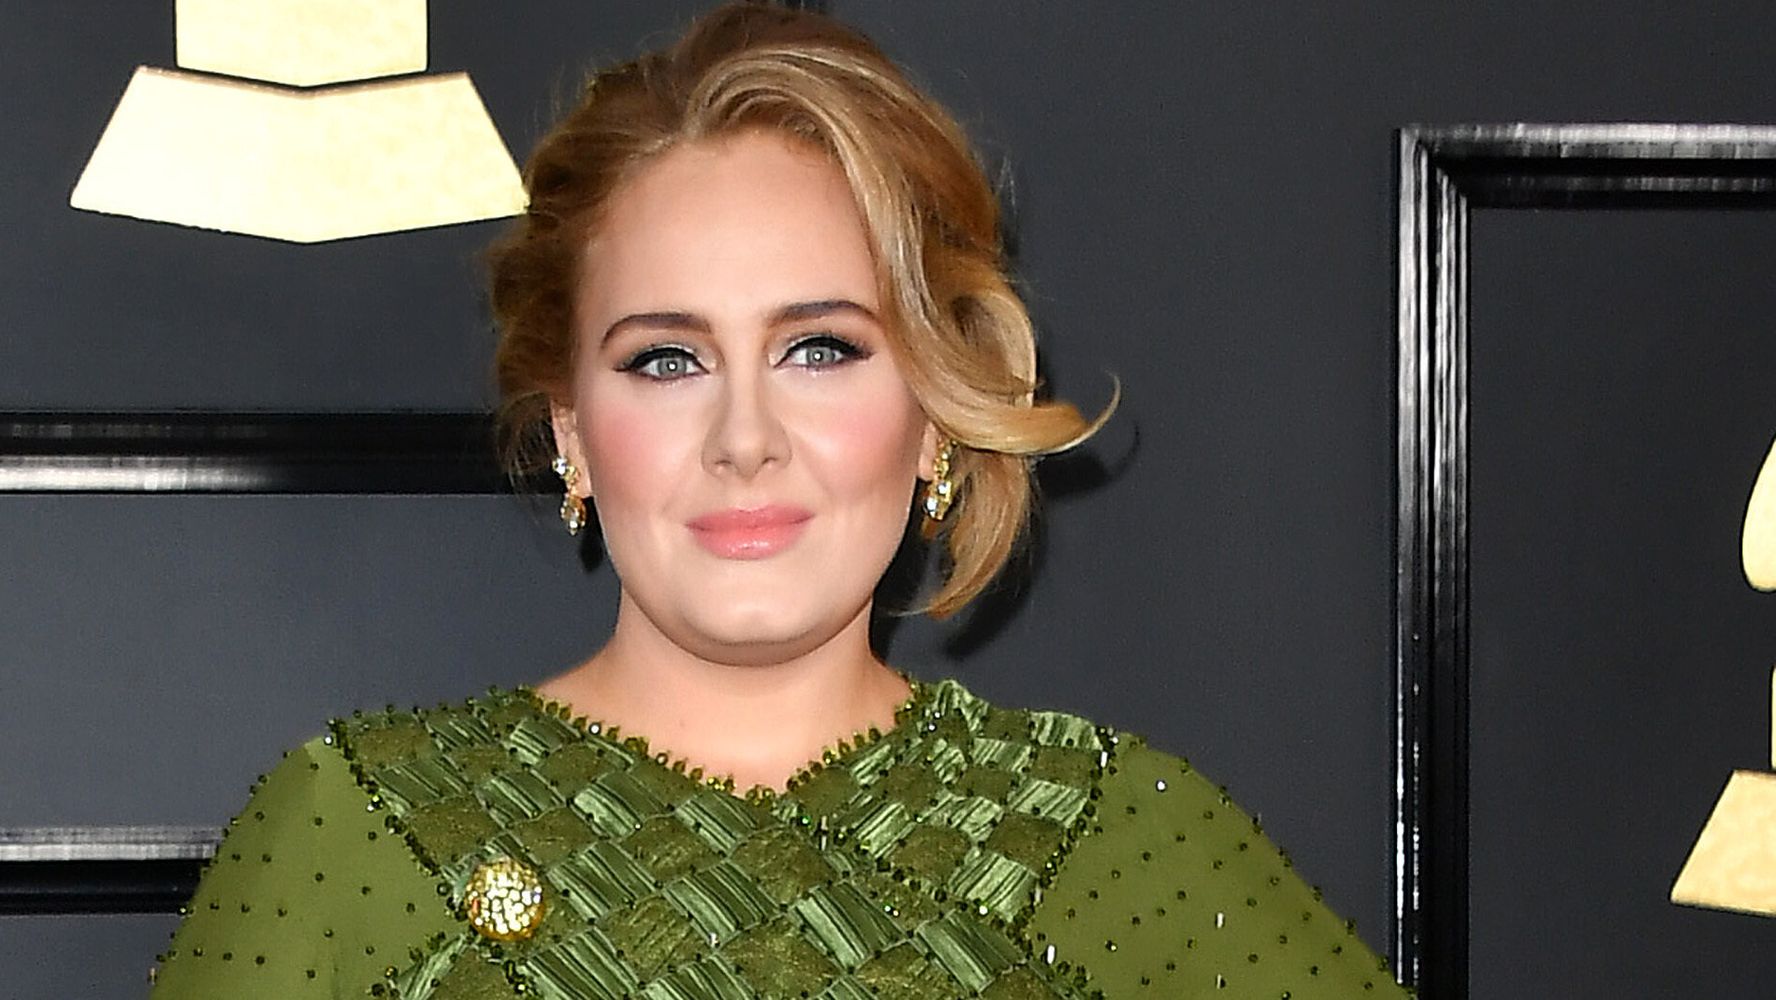 Adele To Host 'Saturday Night Live' For First Time: 'Bloooooody Hellllll'